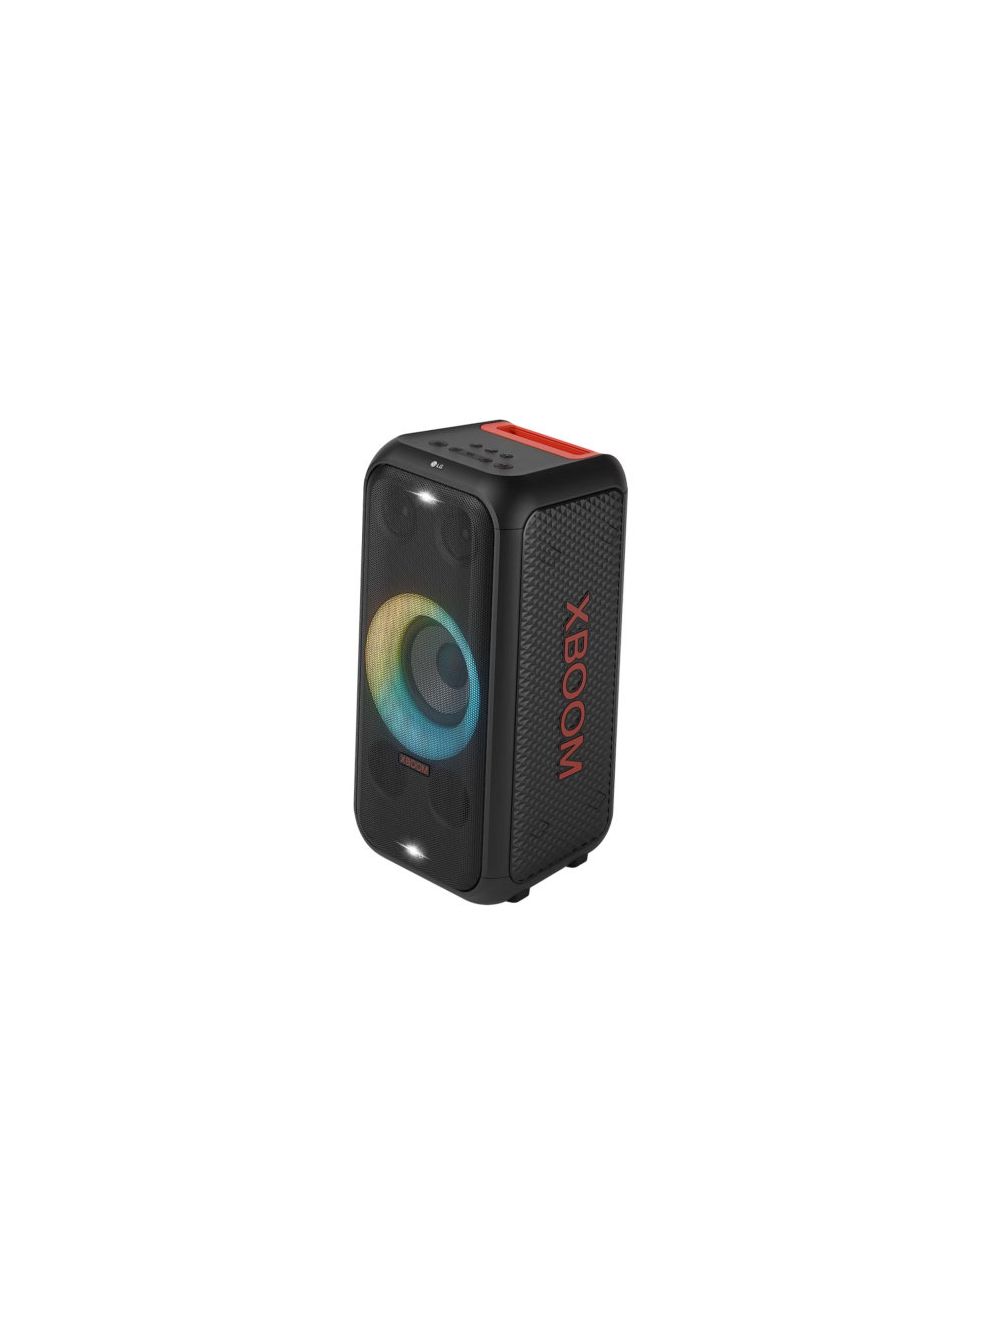 Party with Bluetooth XBOOM XL5S LG Speaker